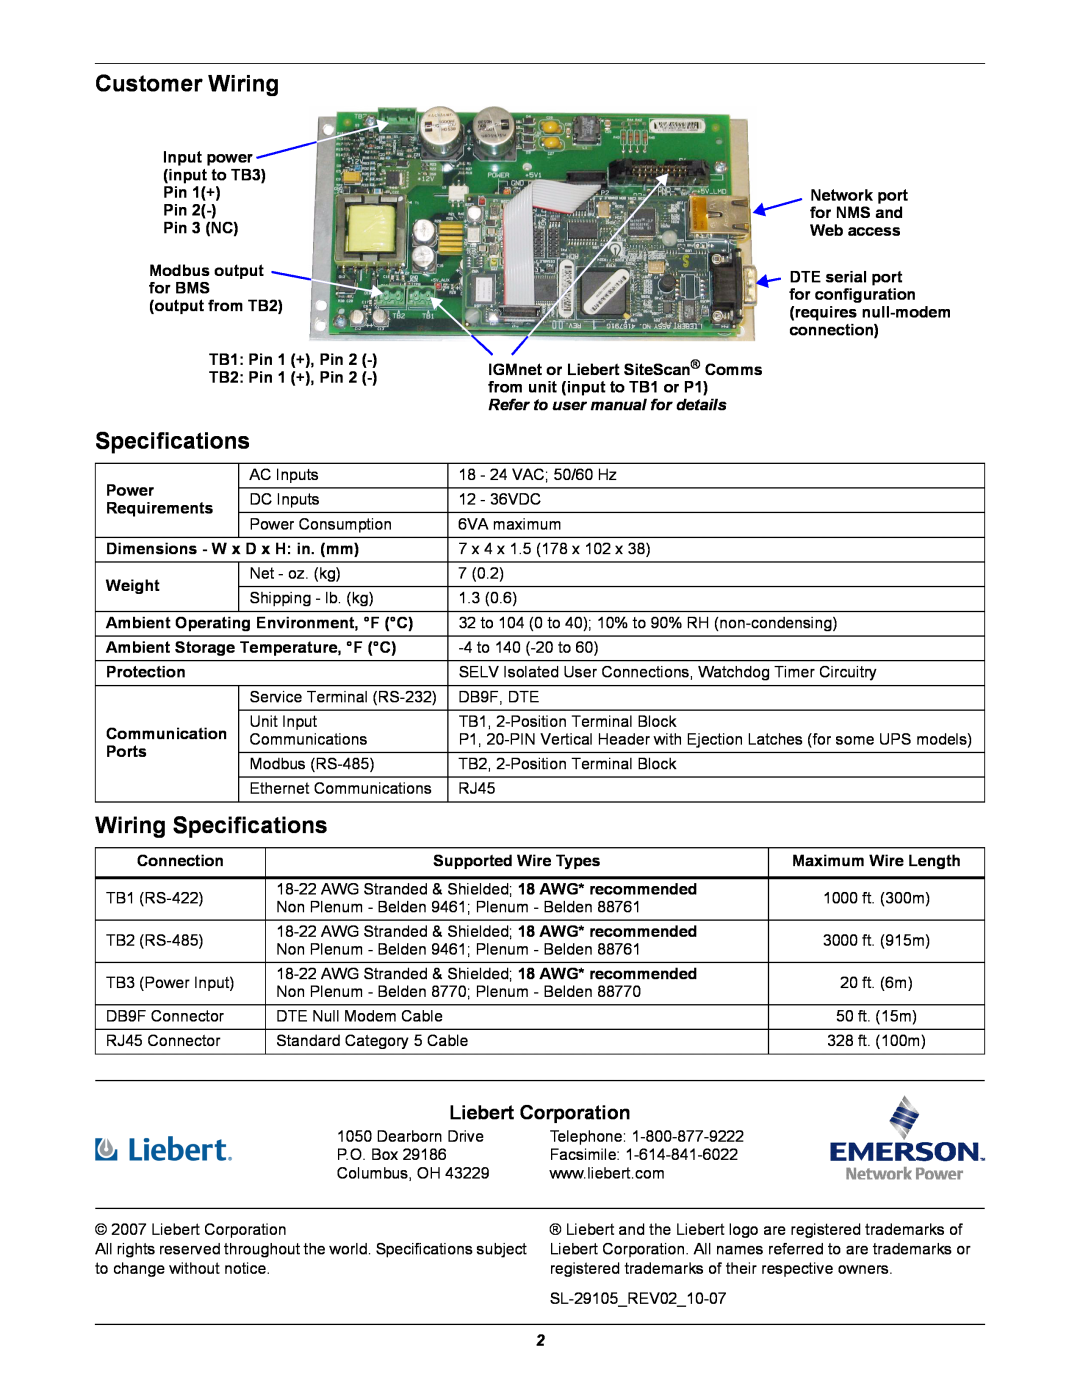 Emerson WEB/485 Customer Wiring, Wiring Specifications, Liebert Corporation, Refer to user manual for details 